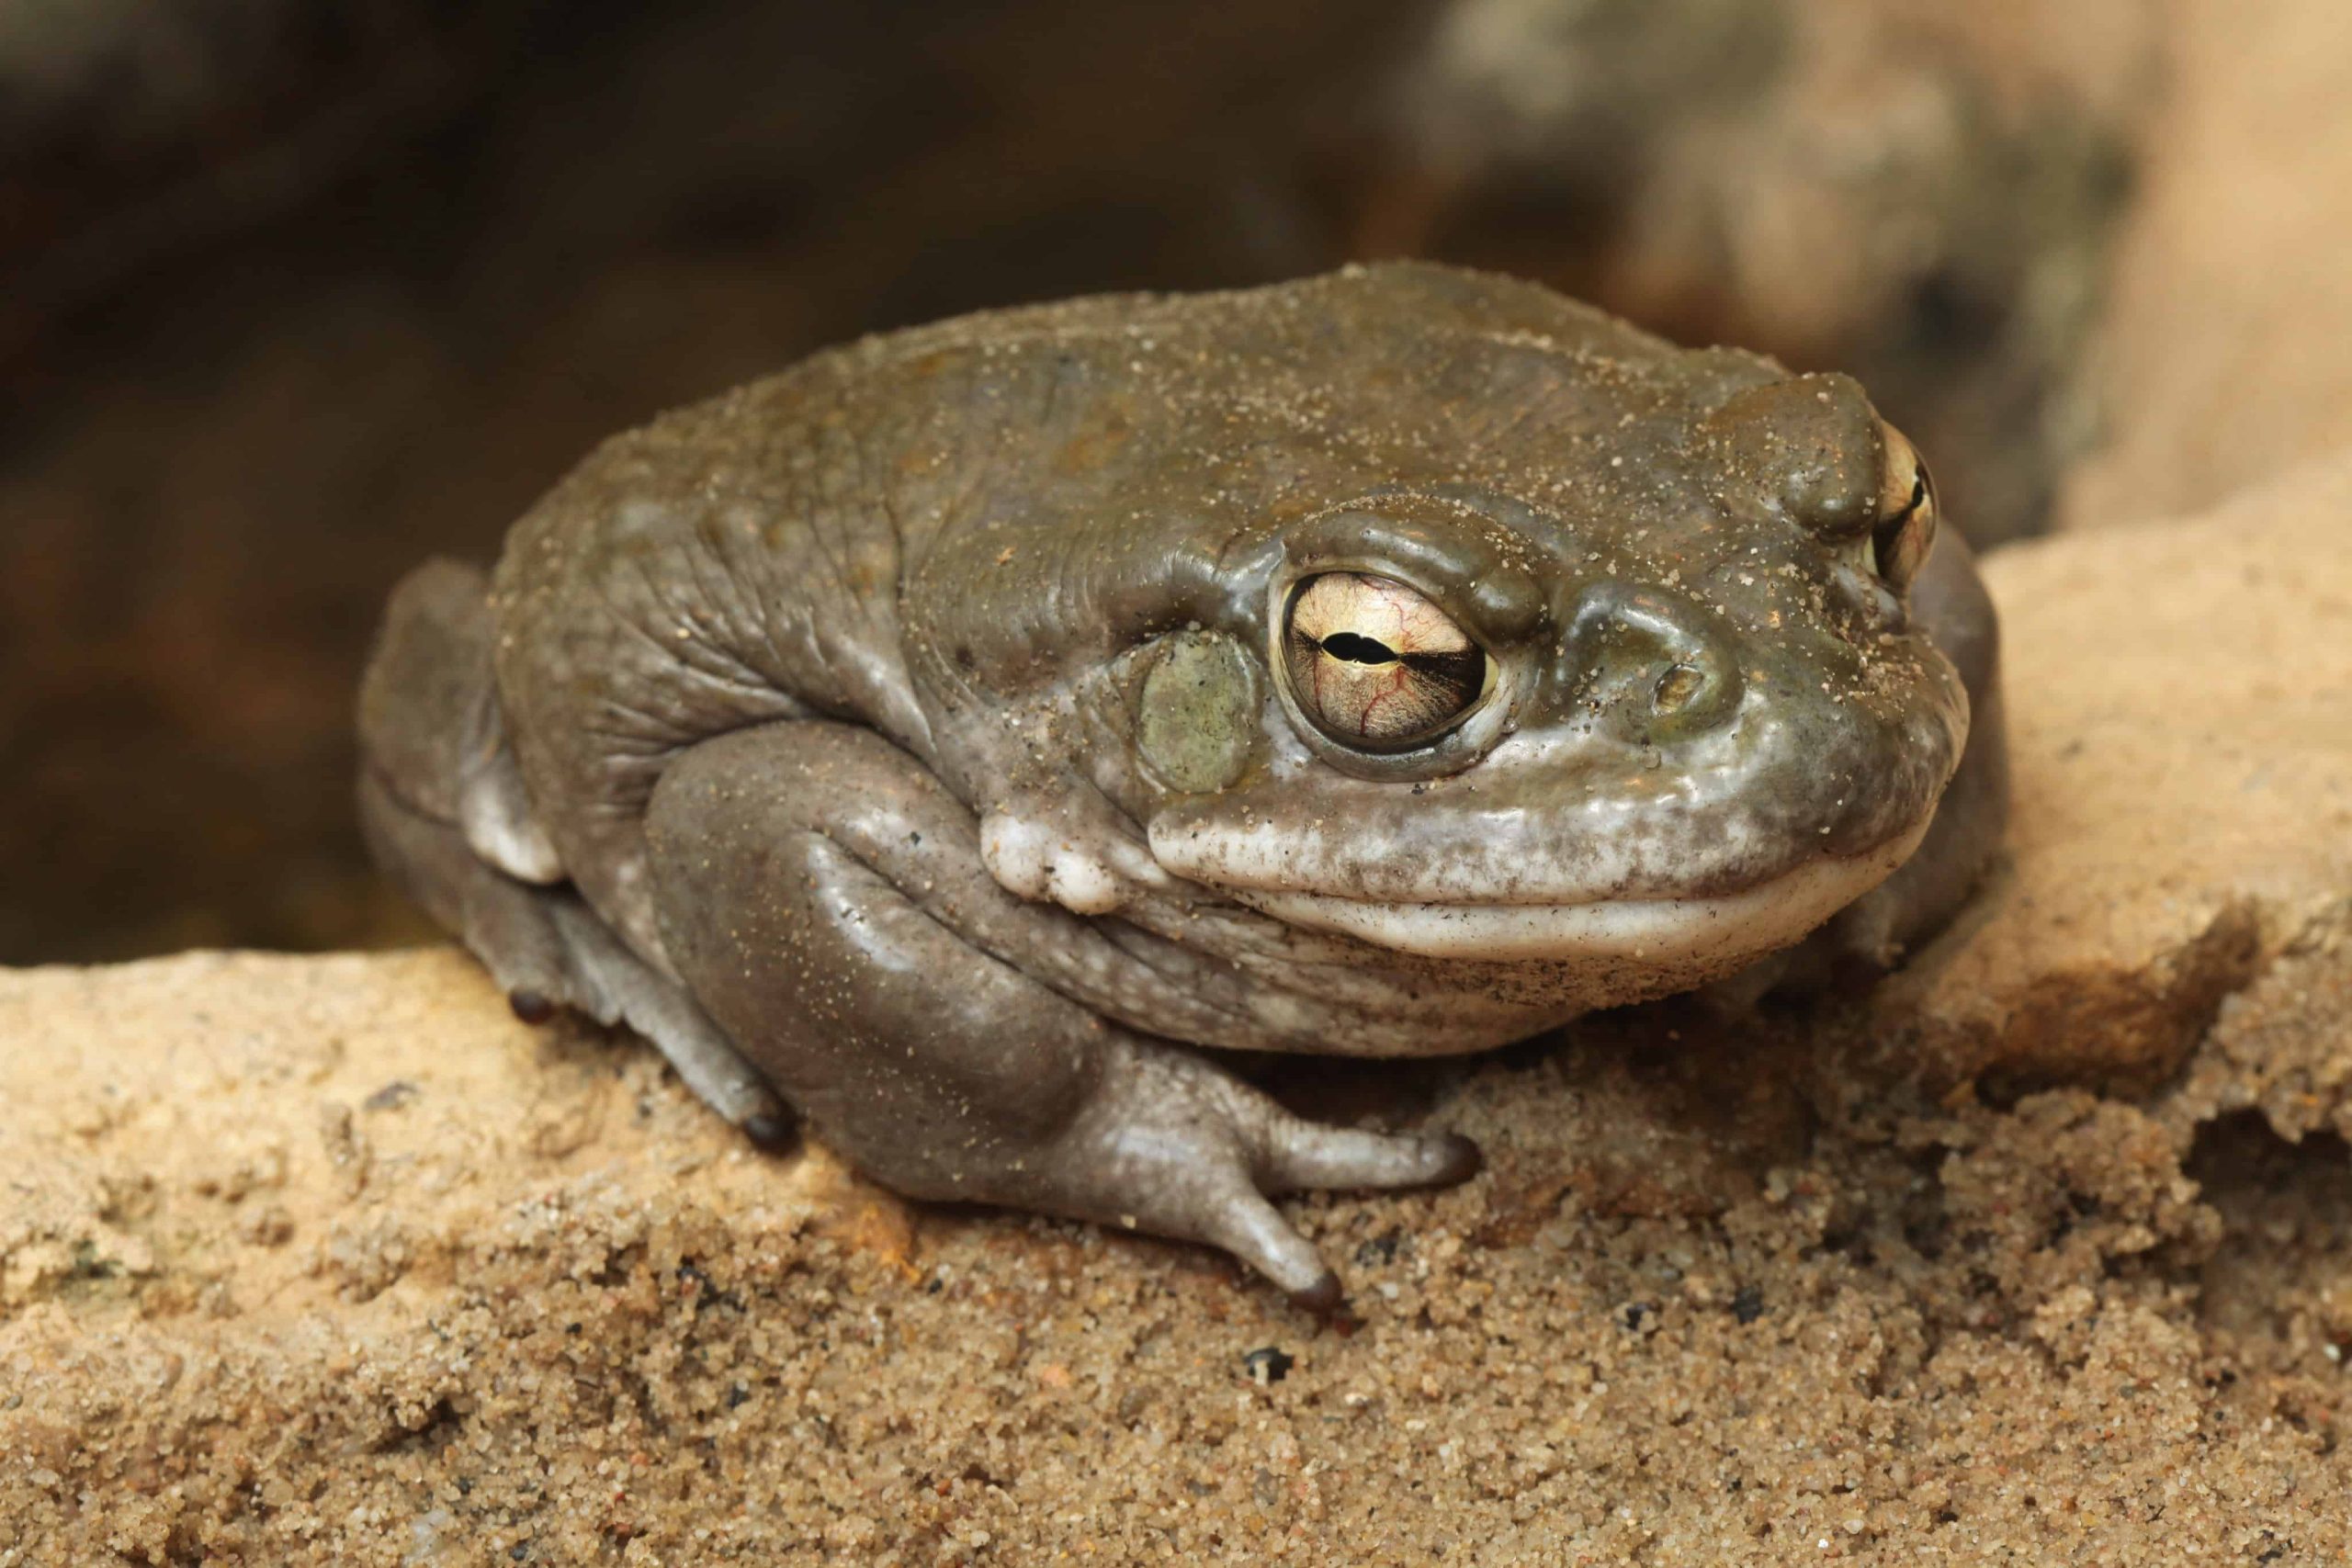 National Park Service Asks Visitors To Stop Licking Toads